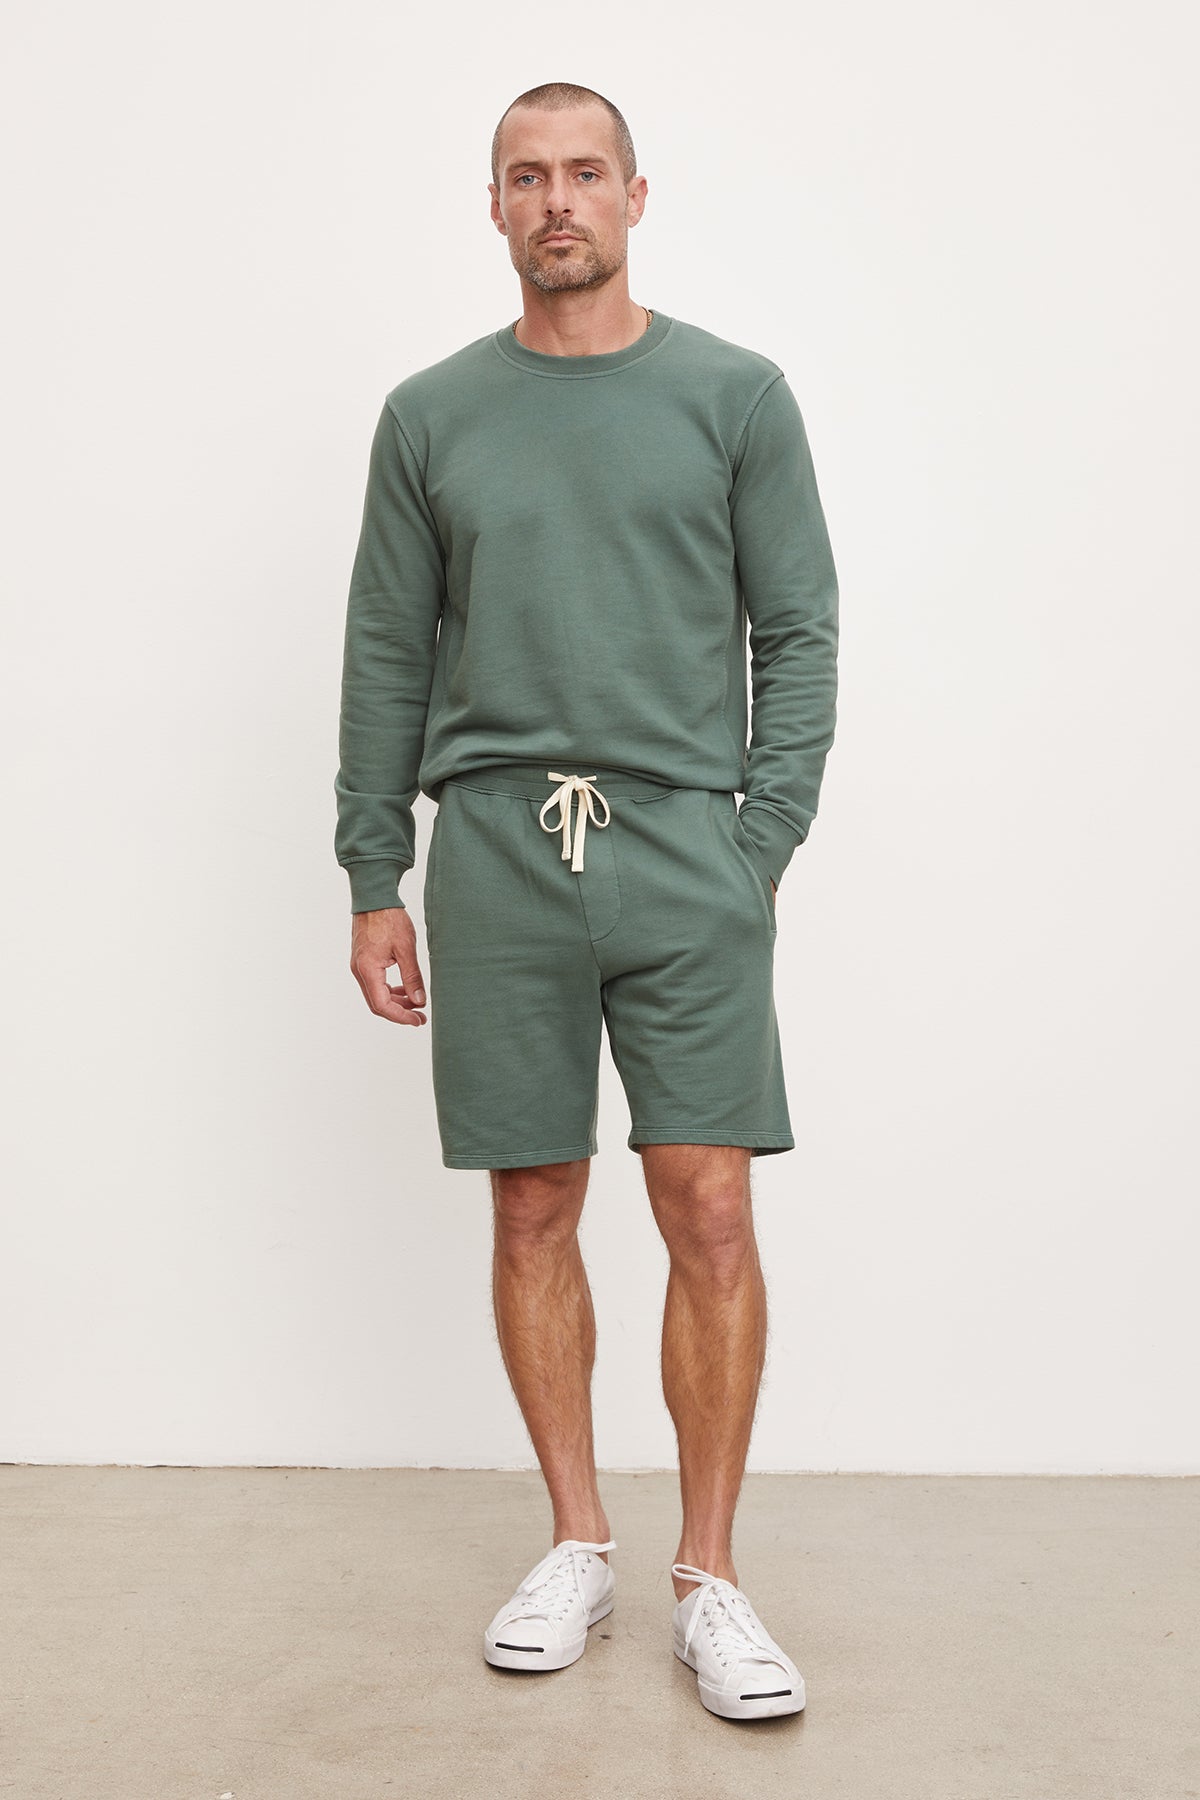 A man stands against a plain background, wearing a green sweatshirt, French terry Beckett shorts from Velvet by Graham & Spencer, and white sneakers.-36918621601985